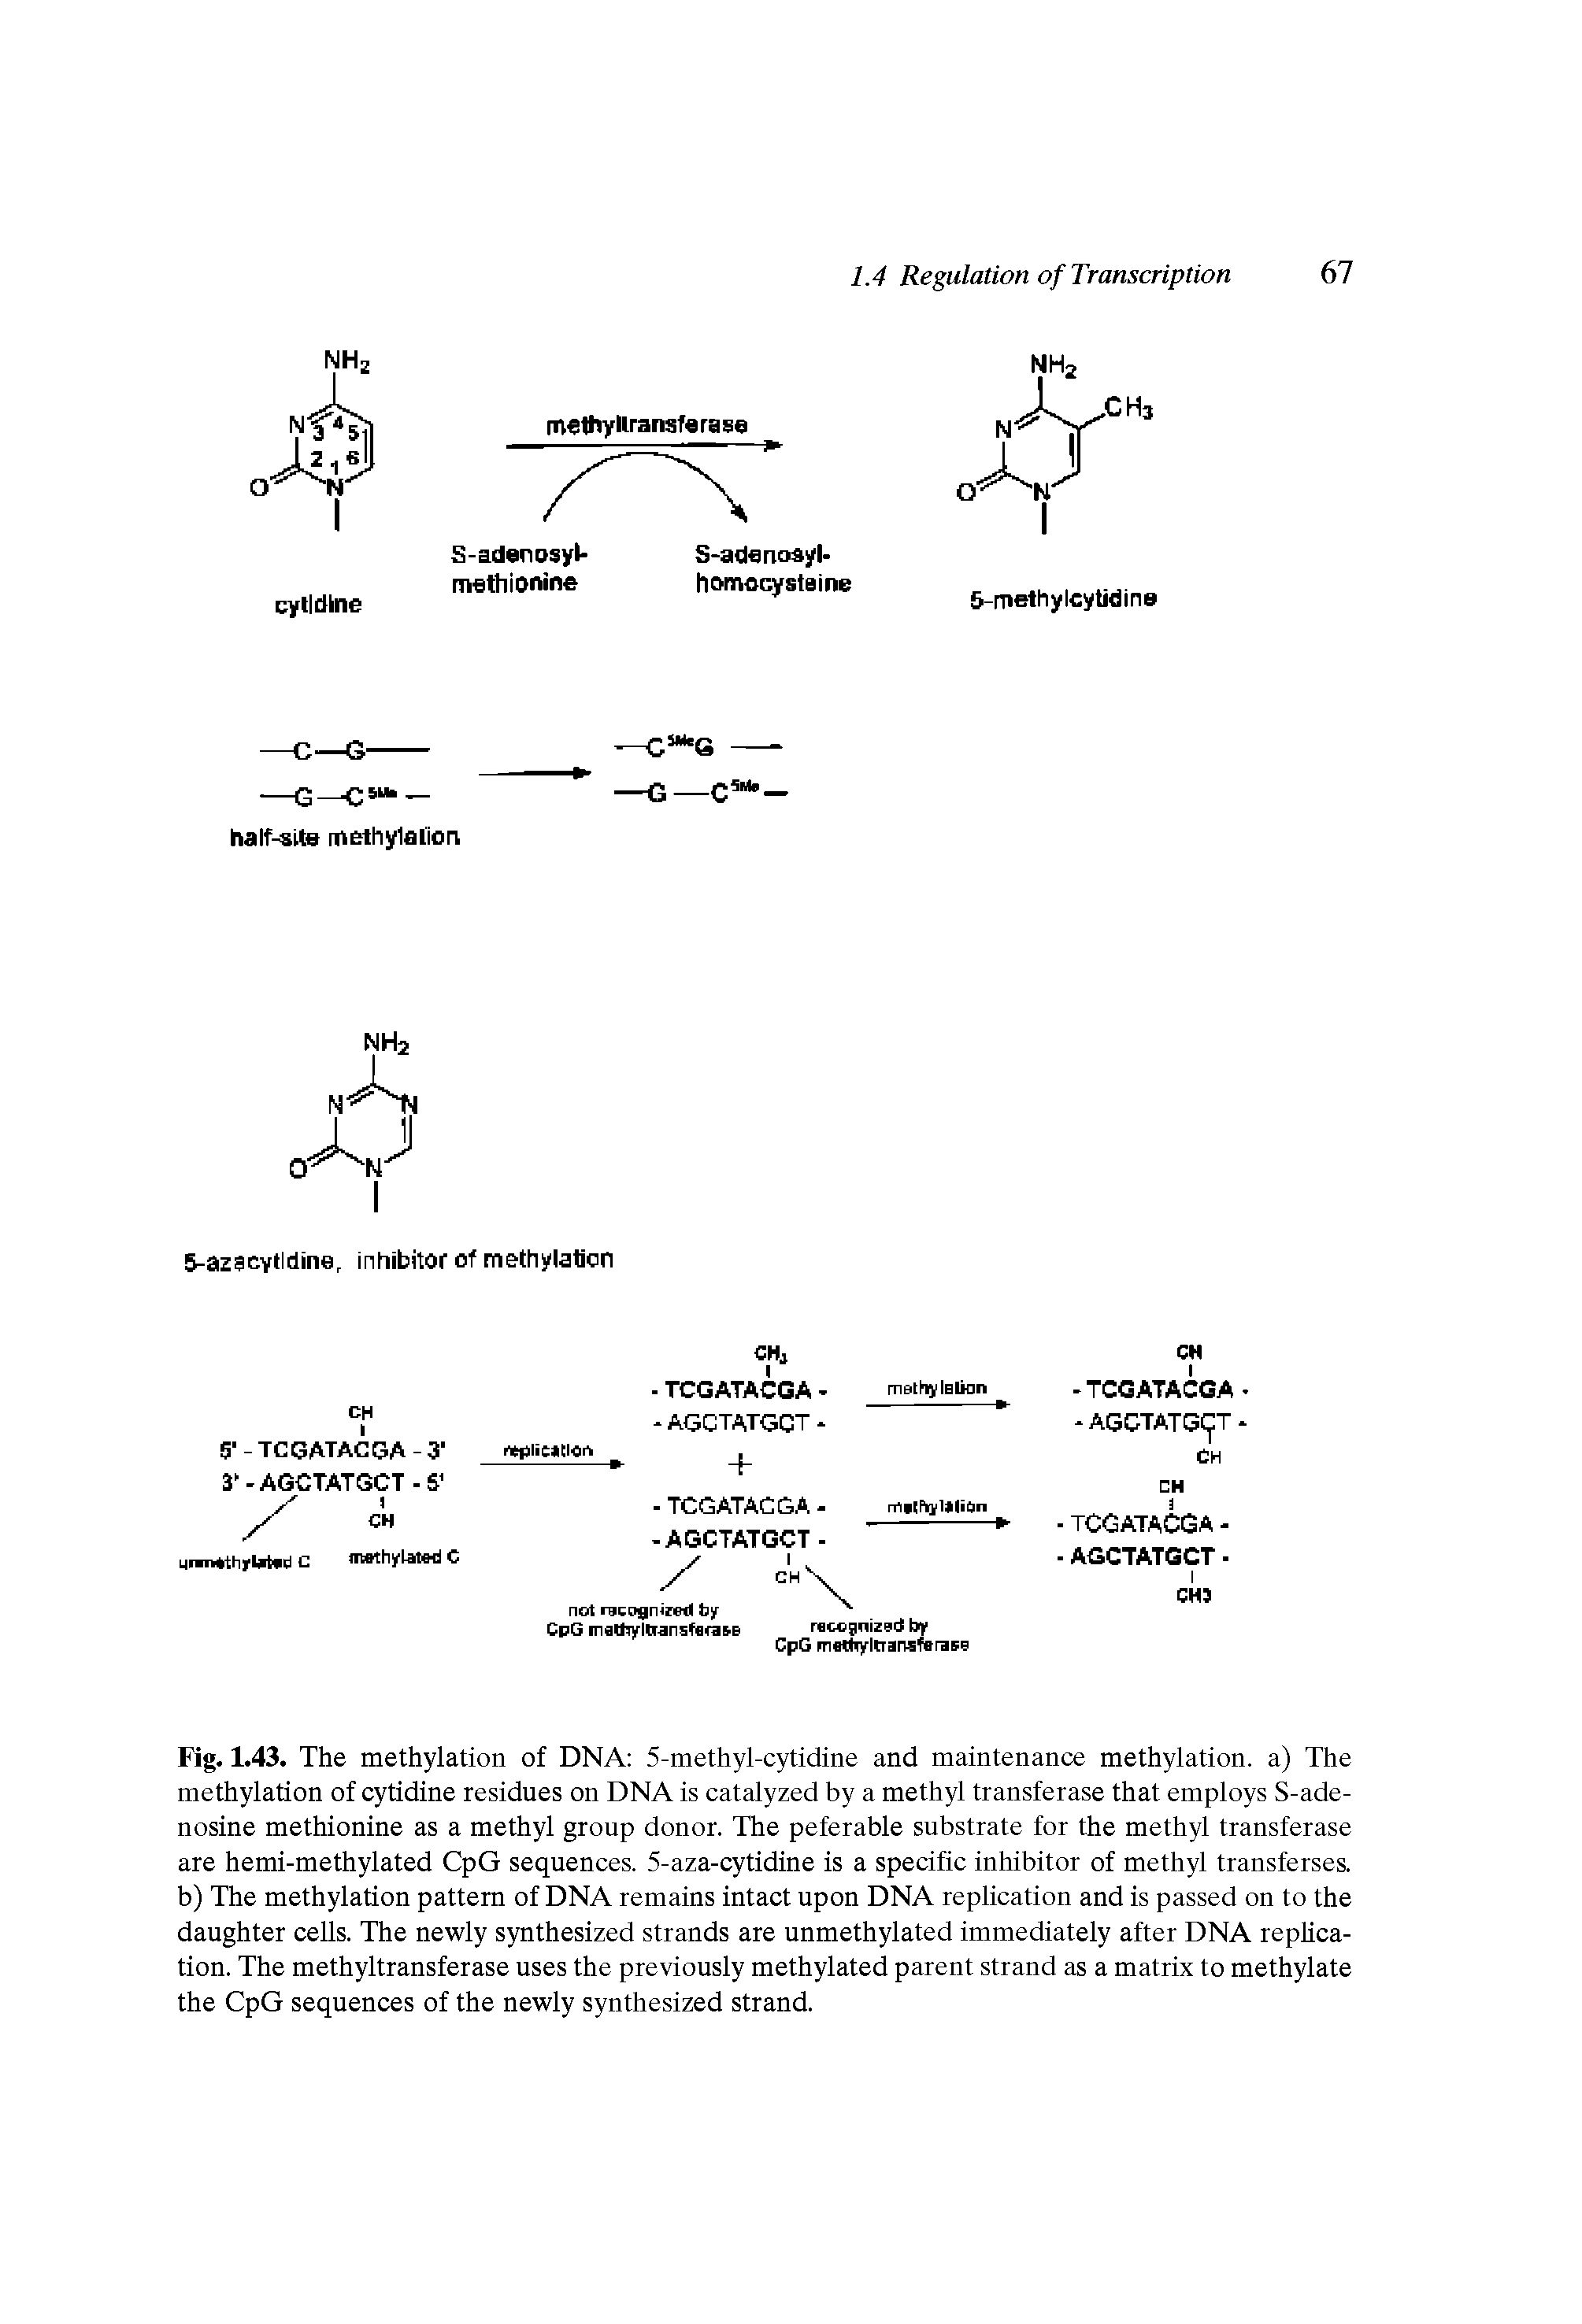 Fig. 1.43. The methylation of DNA 5-methyl-cytidine and maintenance methylation. a) The methylation of cytidine residues on DNA is catalyzed by a methyl transferase that employs S-ade-nosine methionine as a methyl group donor. The peferable substrate for the methyl transferase are hemi-methylated CpG sequences. 5-aza-cytidine is a specific inhibitor of methyl transferses. b) The methylation pattern of DNA remains intact upon DNA replication and is passed on to the daughter cells. The newly synthesized strands are unmethylated immediately after DNA rephca-tion. The methyltransferase uses the previously methylated parent strand as a matrix to methylate the CpG sequences of the newly synthesized strand.